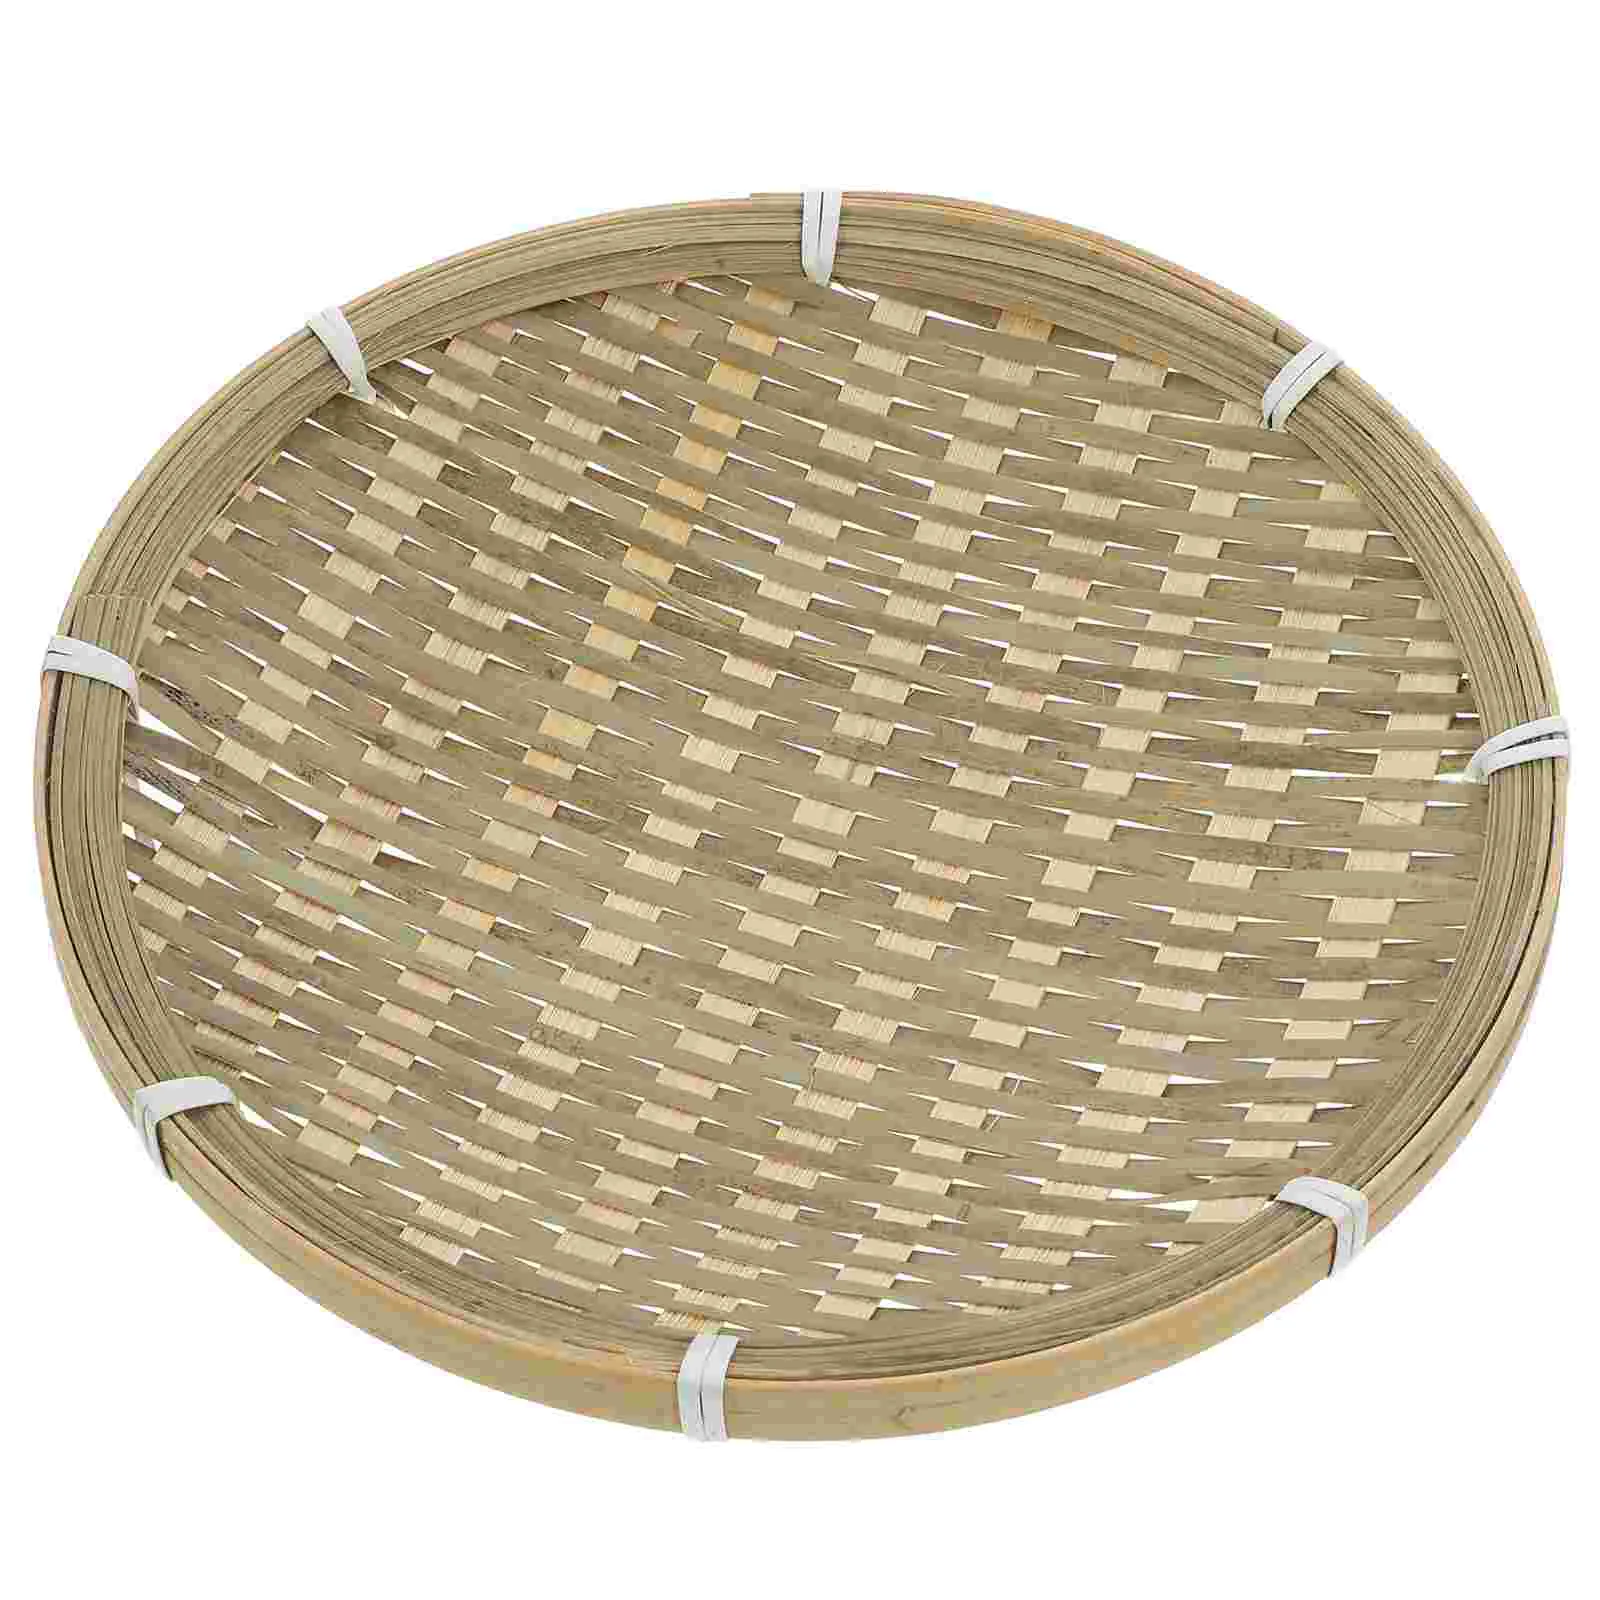 Bamboo Storage Basket Bread Woven Tray Decorative Food Loaf Fruit Creative Vegetable Baskets